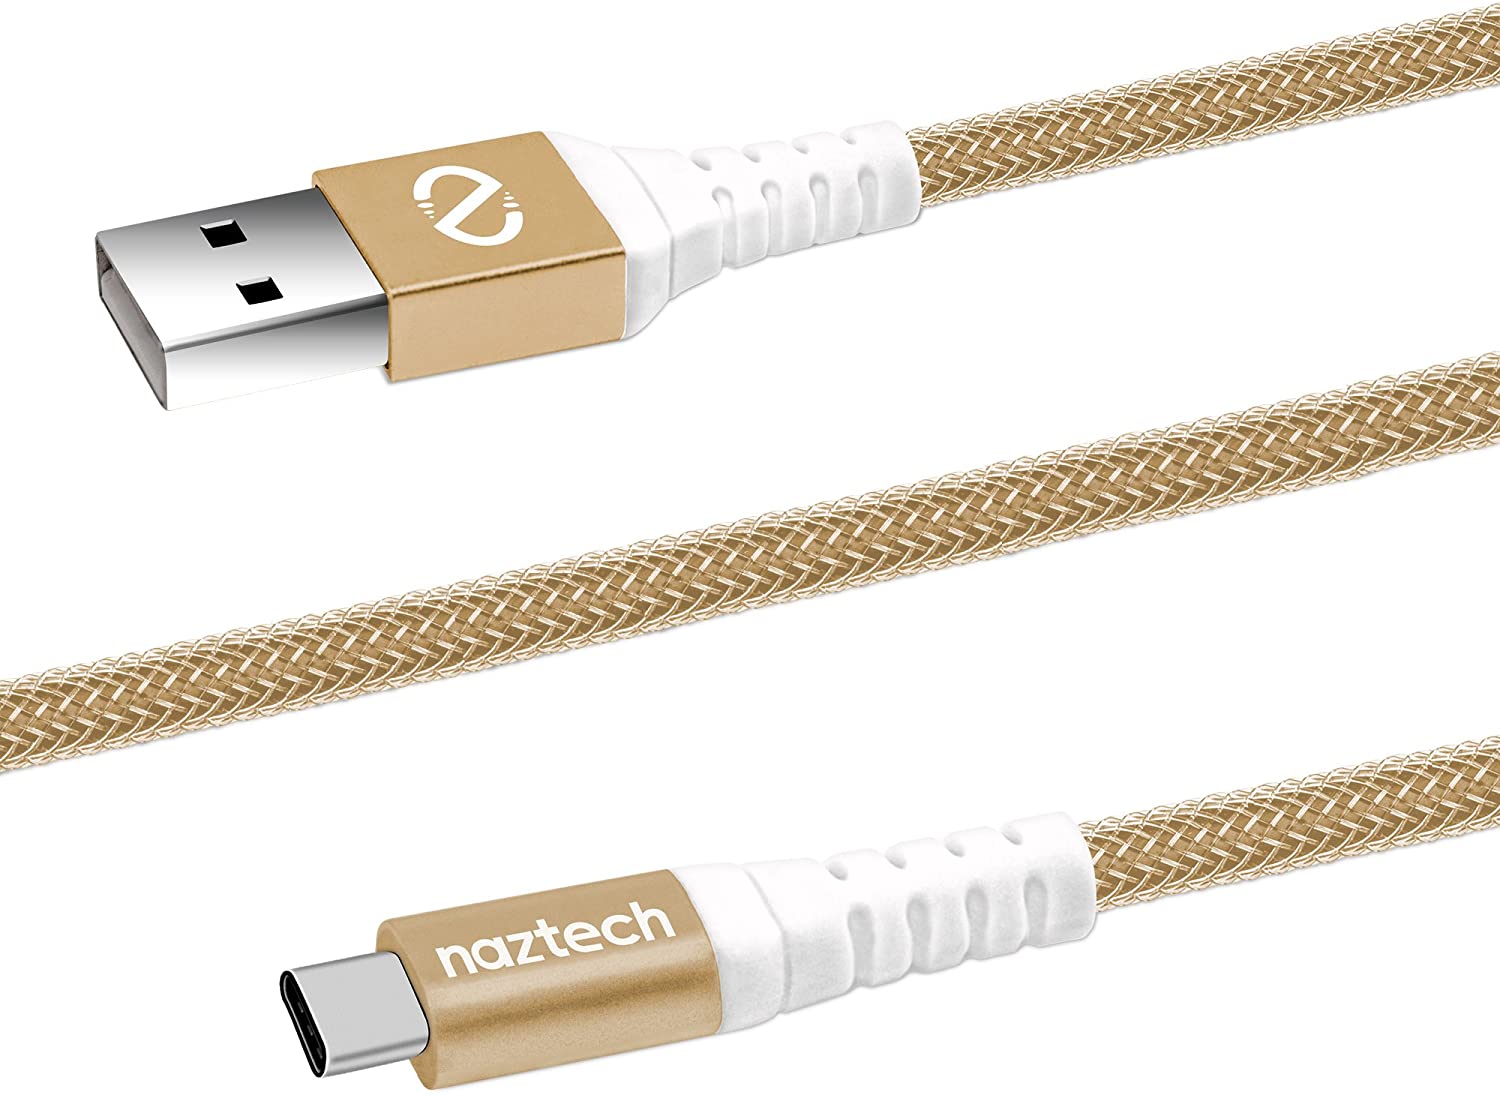 Naztech Braided Usb A To Usb C 2.0 Charge Sync Cable 4Ft